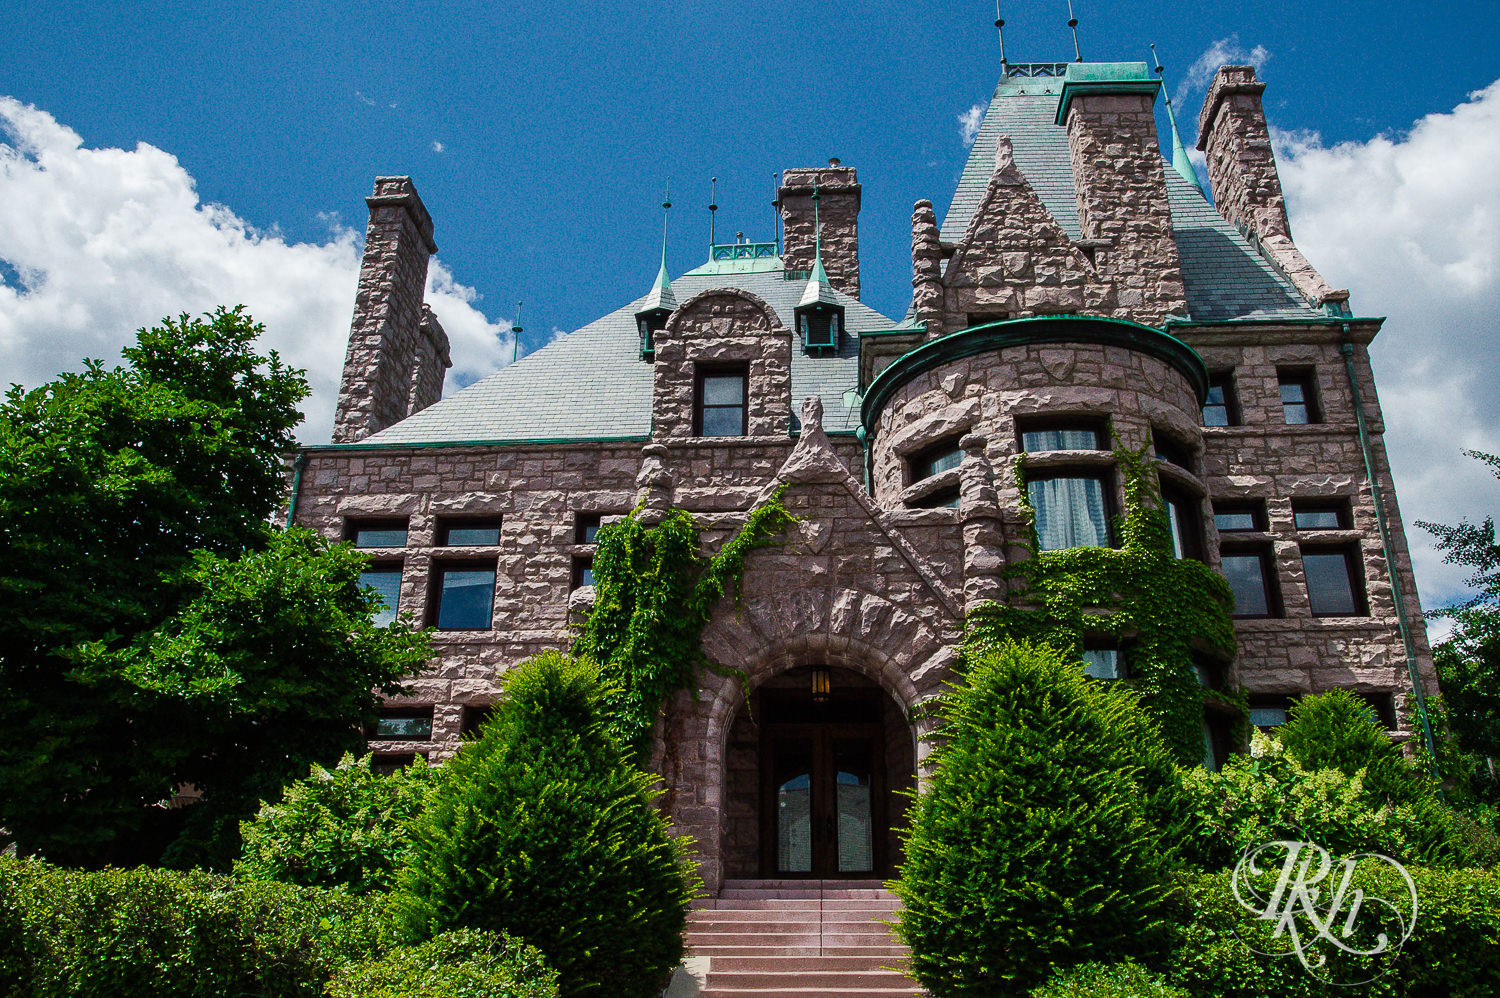 Wide photograph of the Van Dusen Mansion in Minneapolis, Minnesota on a summer day.